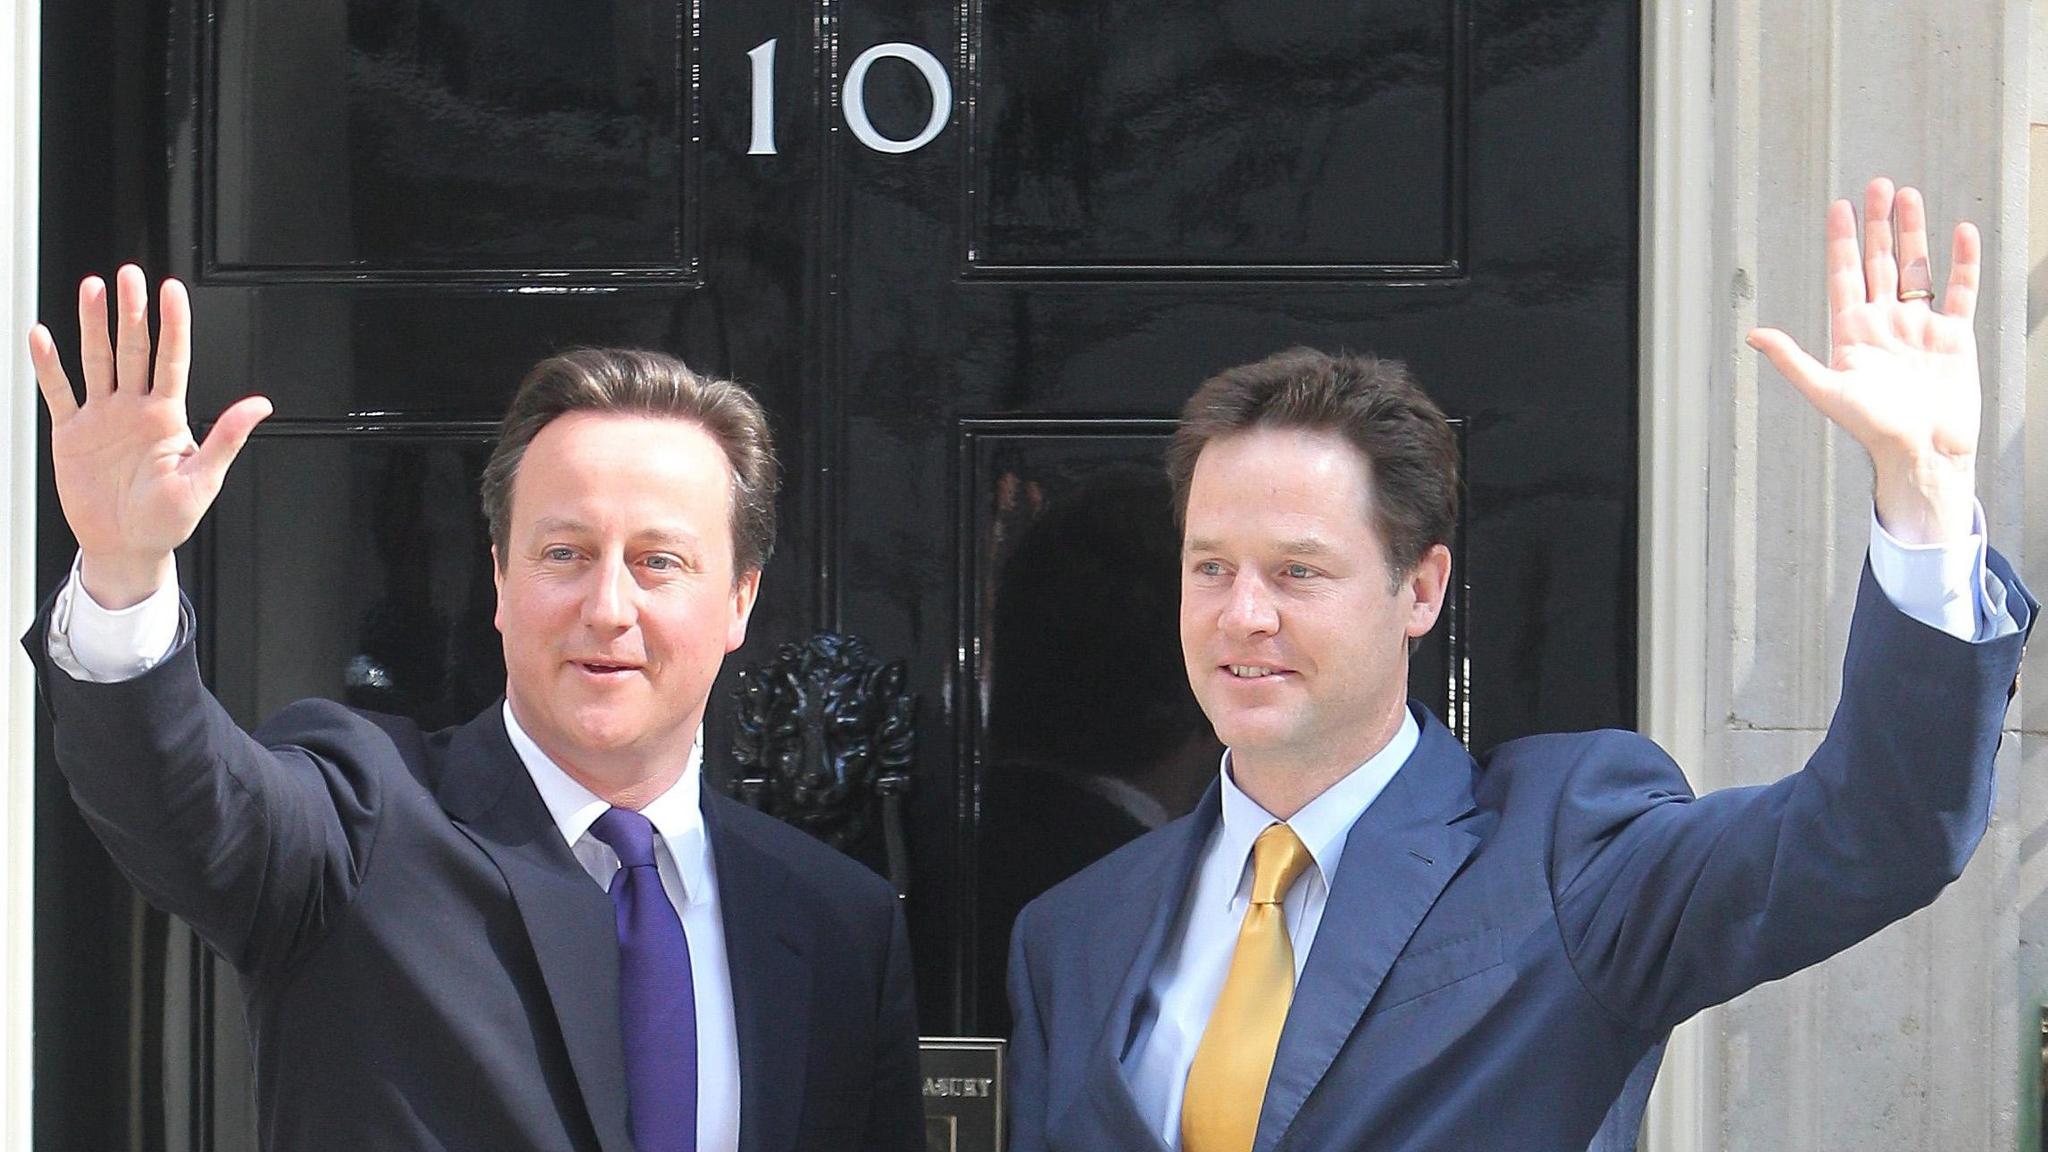 The new British Prime  Minister David Cameron (left) with the new Deputy Prime Minister Nick Clegg on the steps of 10 Downing Street in central London, before getting down to the business of running the country. PRESS ASSOCIATION Photo. Picture date: Wednesday May 12 2010. The pair went to work hours after finally putting together their historic Tory/Lib Dem coalition government. See PA story POLITICS Coalition. Photo credit should read: Lewis Whyld/PA Wire